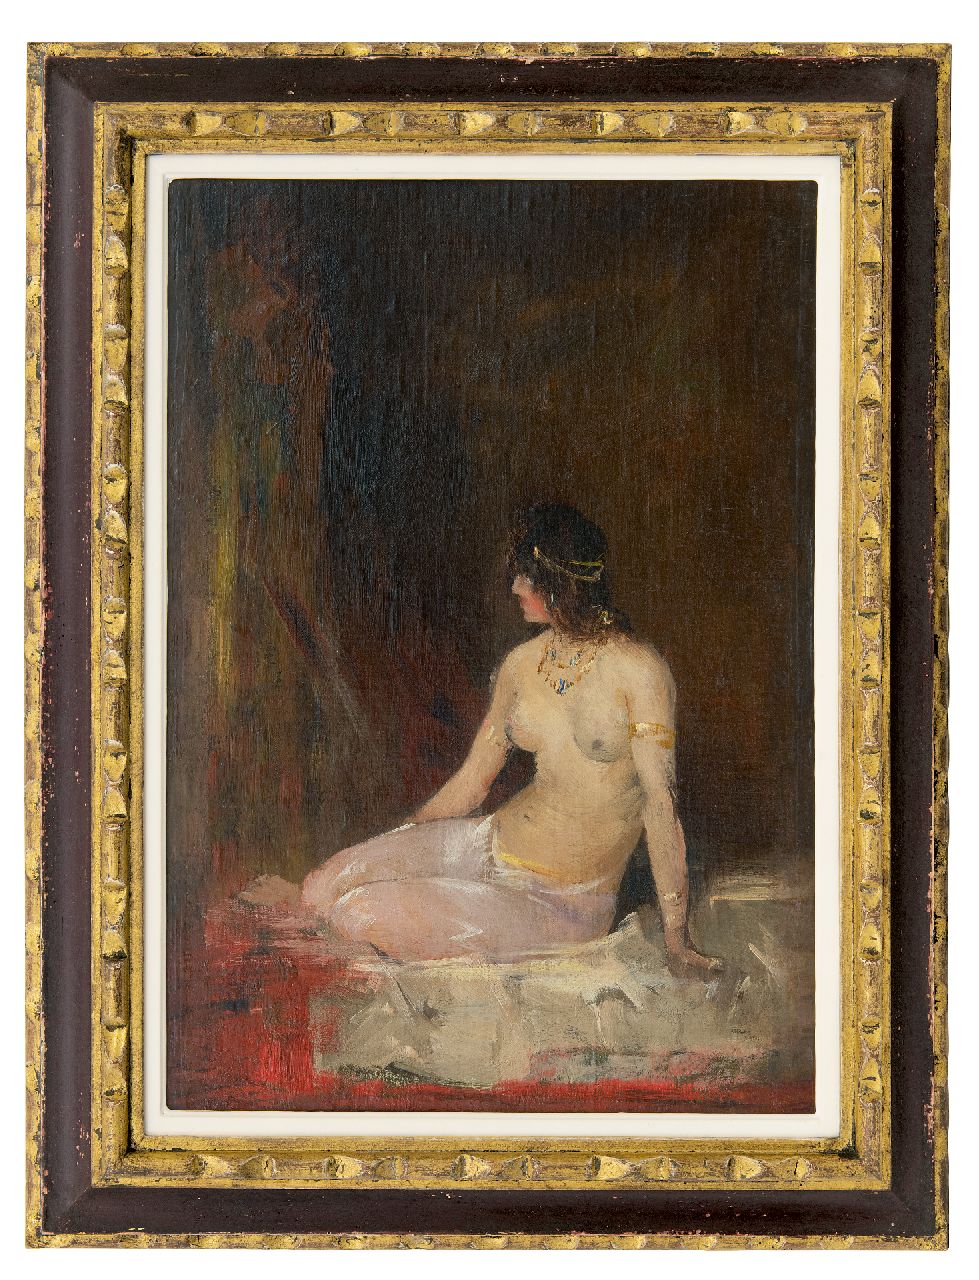 Smith H.  | Hobbe Smith | Paintings offered for sale | Seated nude, oil on canvas laid down on panel 50.0 x 35.5 cm